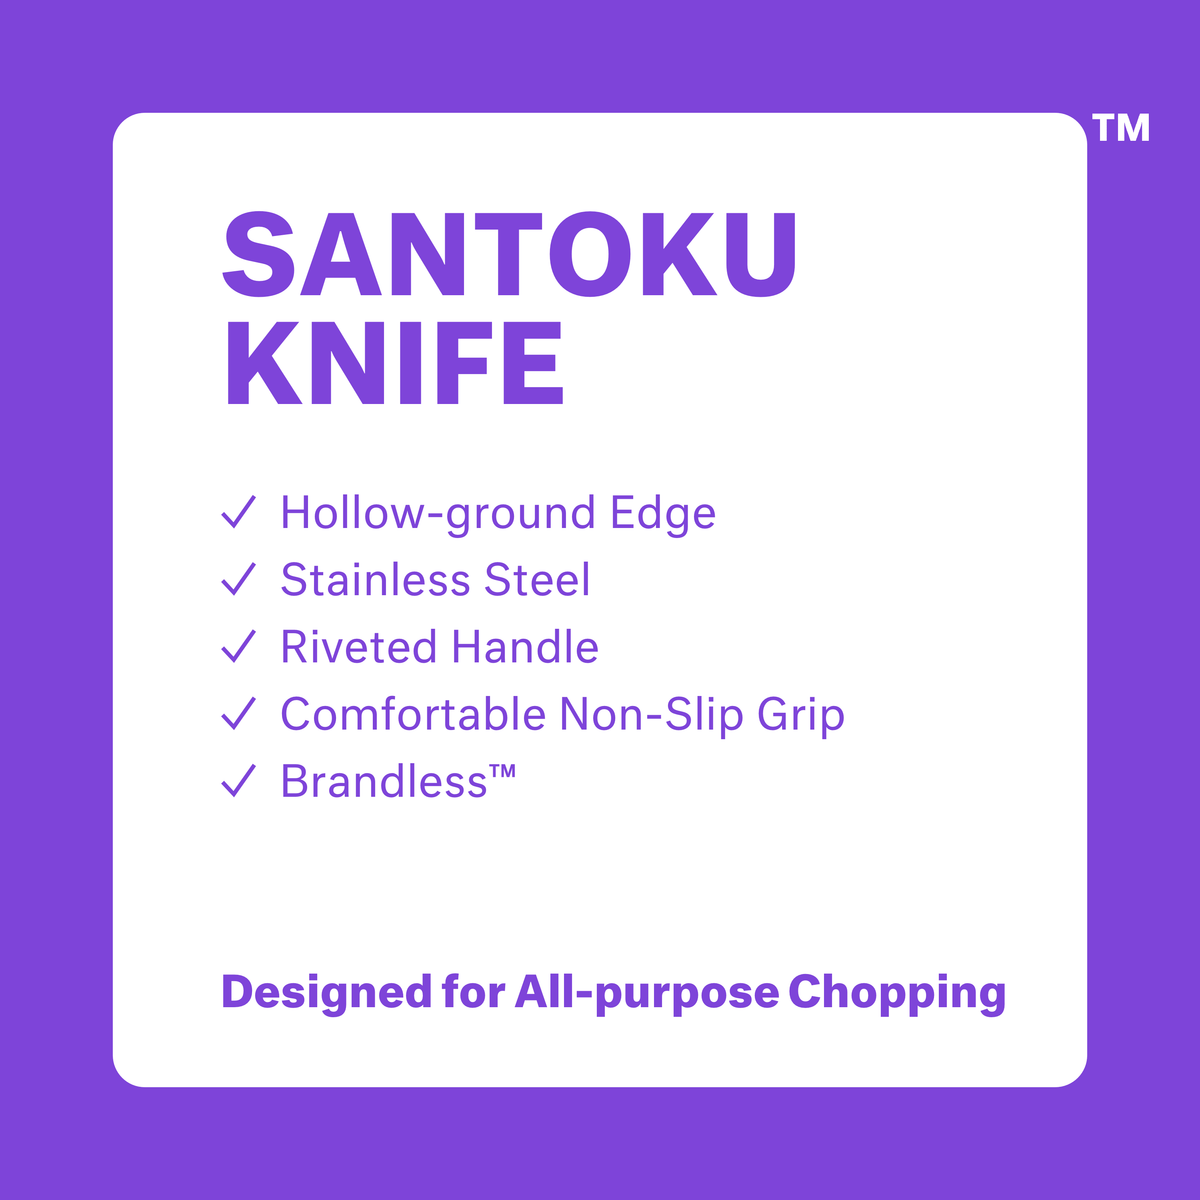 Santoku Knife. Hollow-ground edge. Stainless steel. Riveted handle. Comfortable non-slip grip. Brandless. Designed for all-purpose chopping..